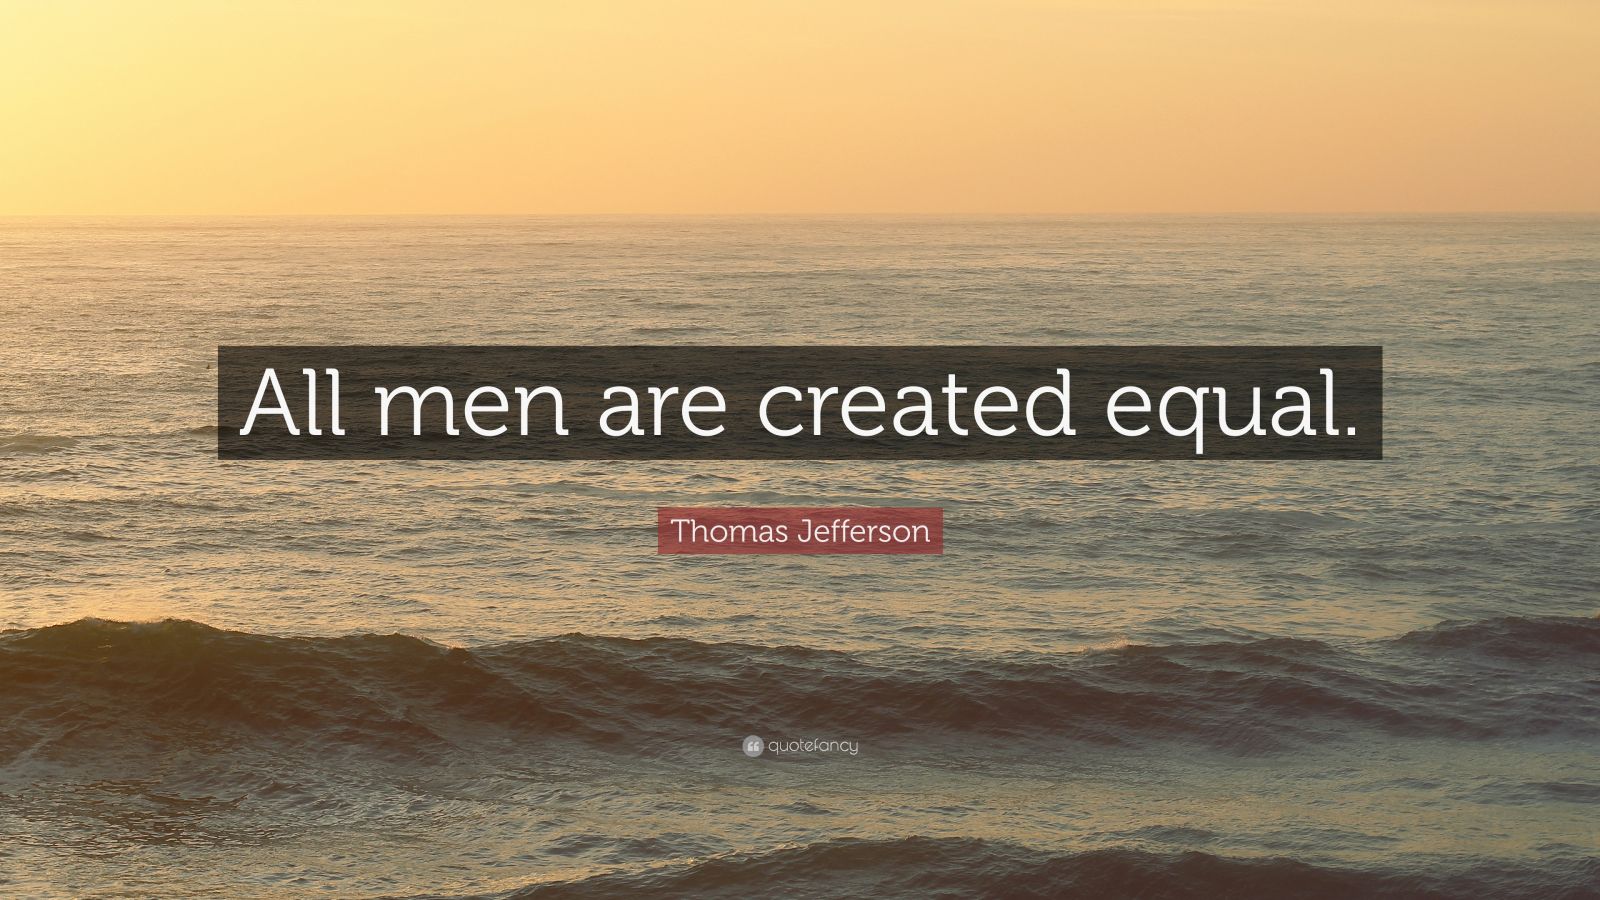 self evident that all men are created equal